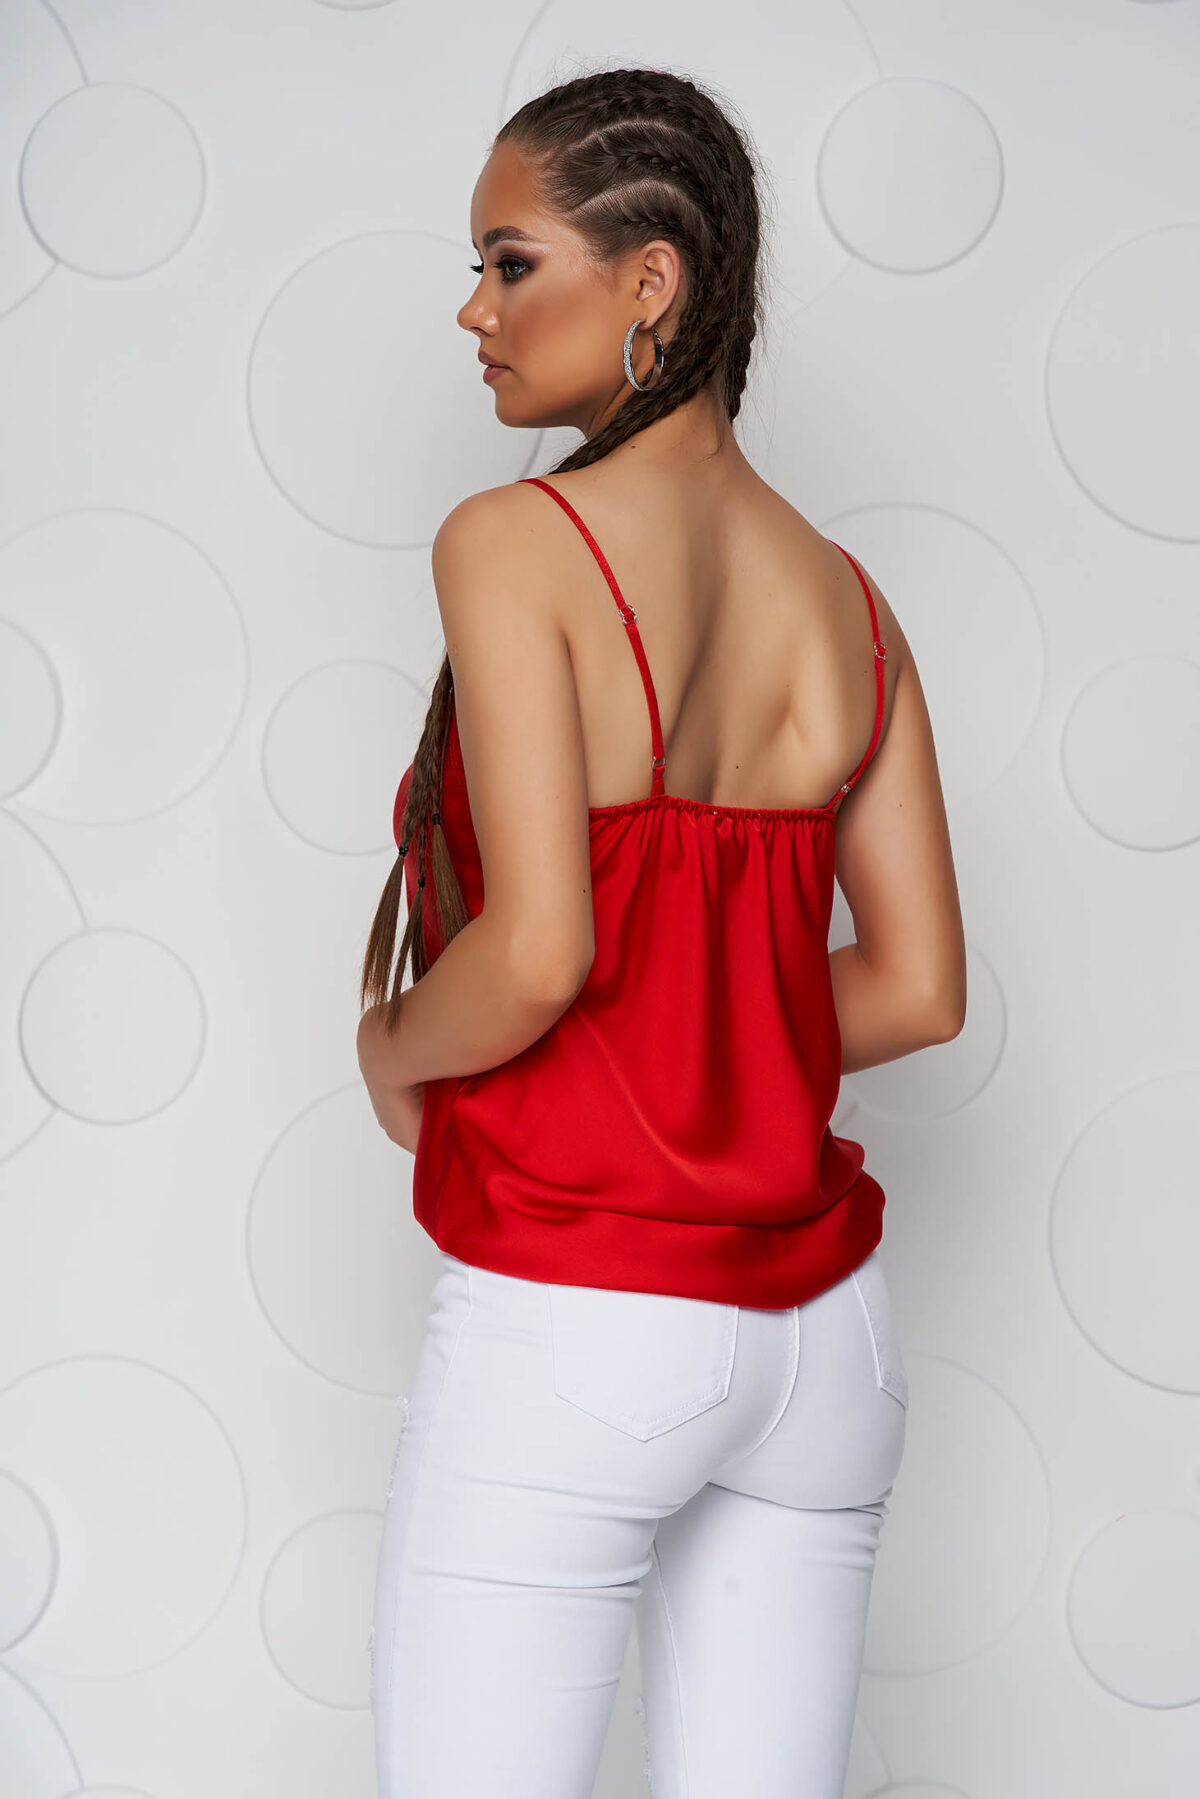 Red Top Shirt Loose Fit From Satin With Straps With Lace Details.